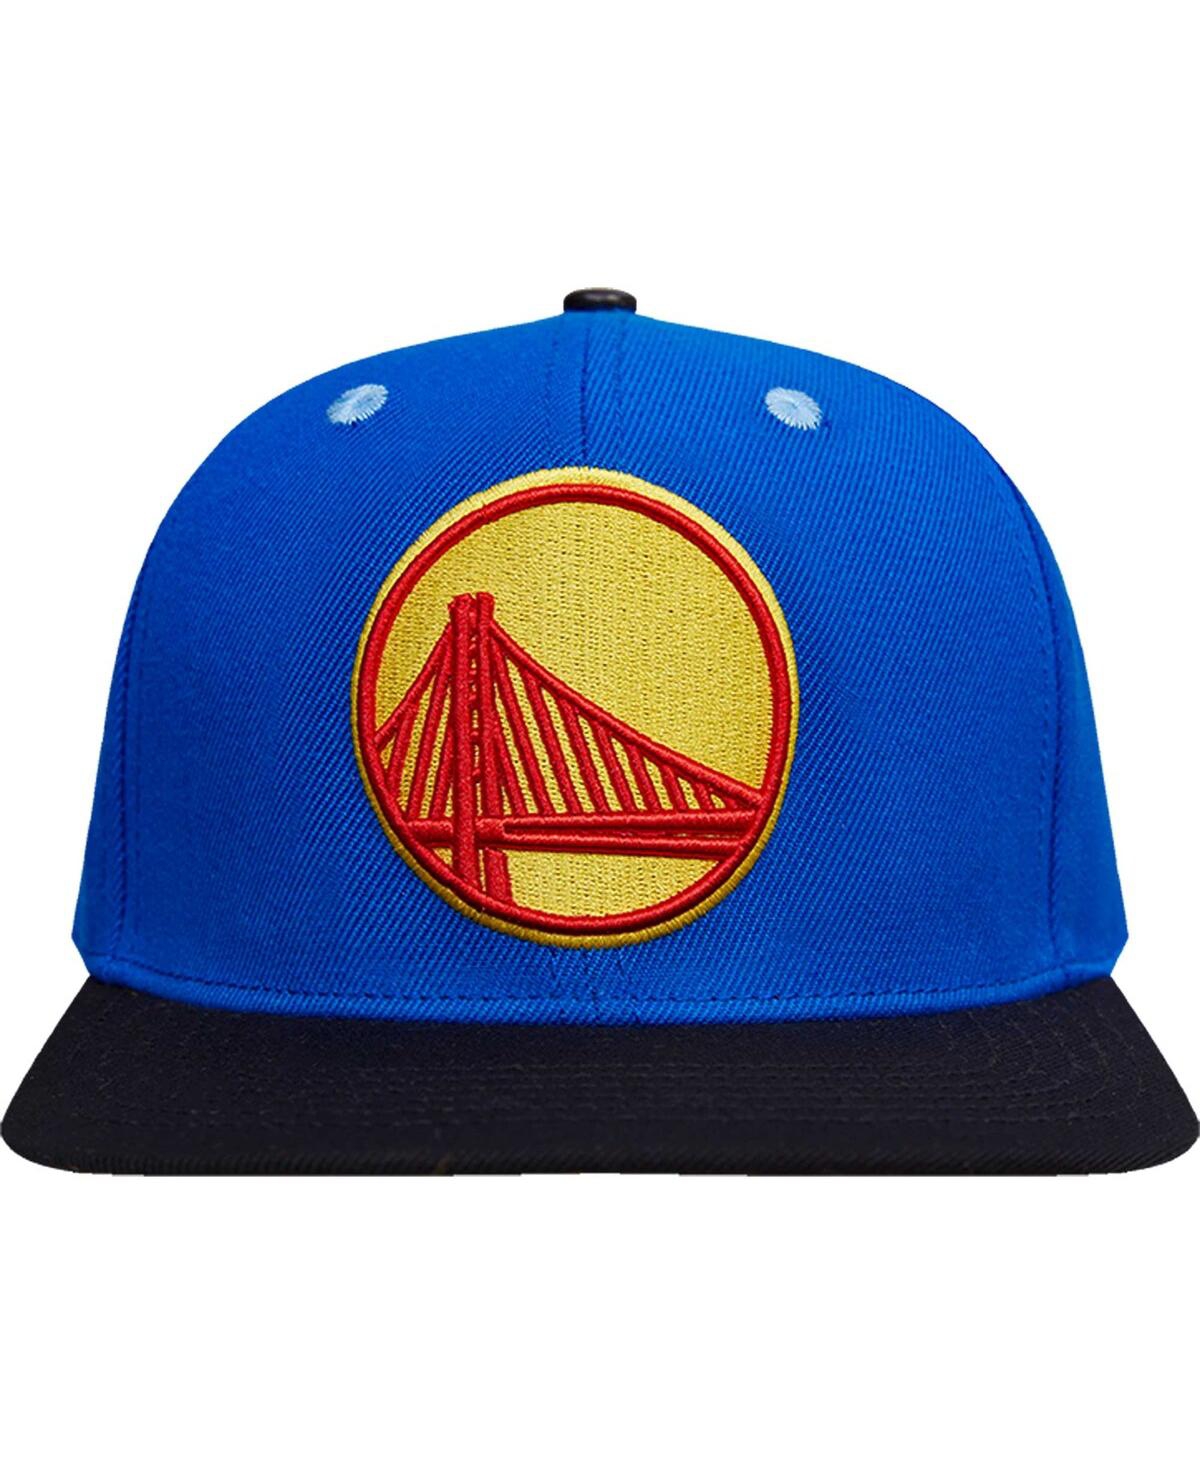 Shop Pro Standard Men's  Royal Golden State Warriors 7x Nba Finals Champions Any Condition Snapback Hat